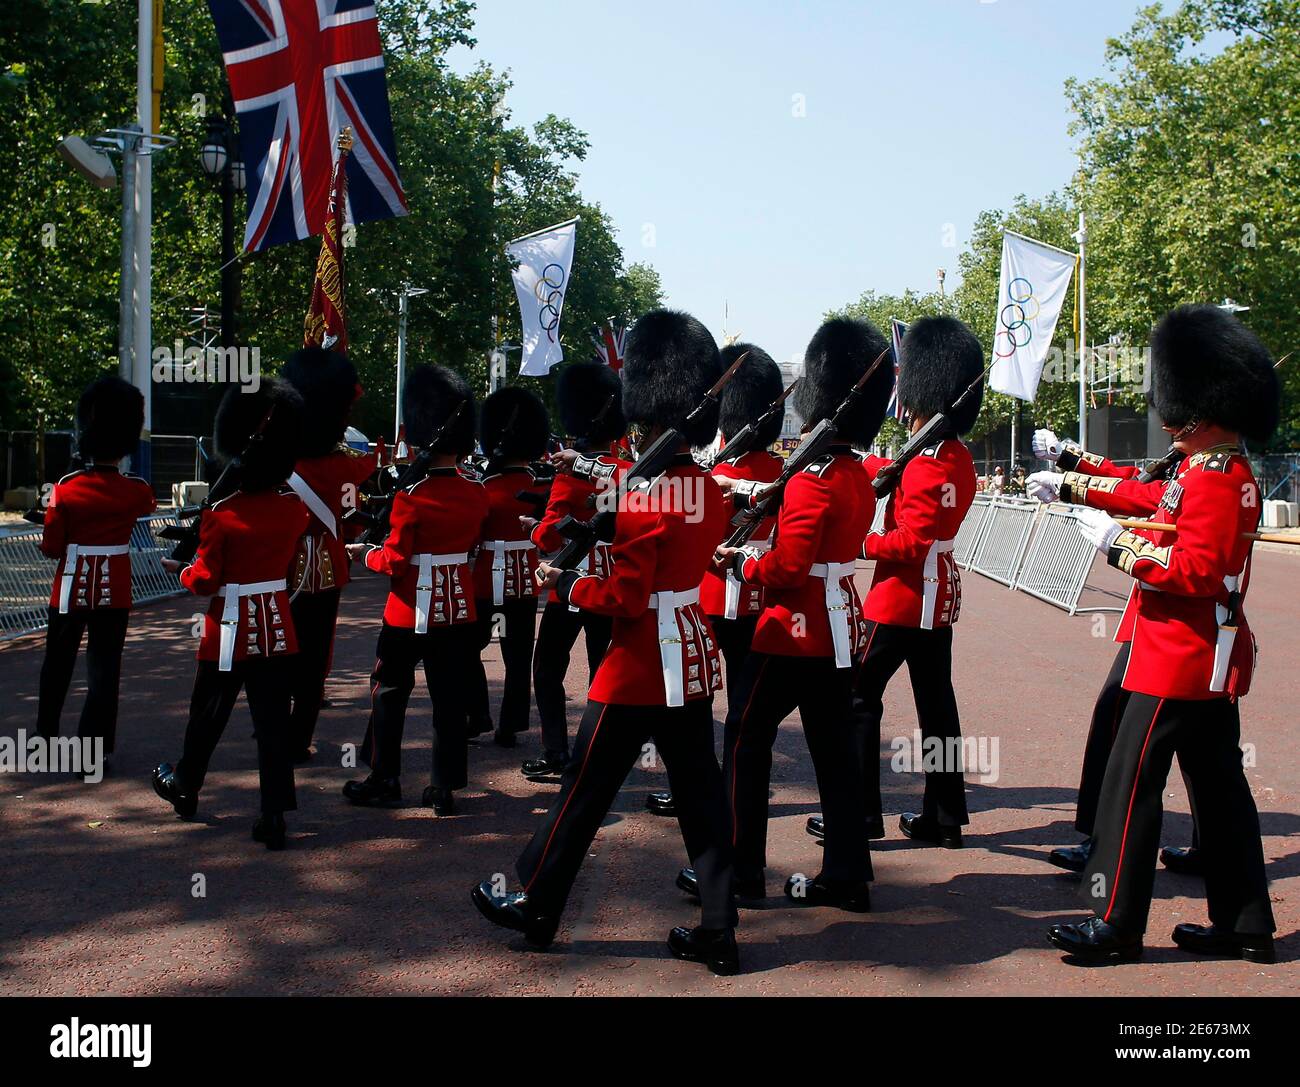 Guardsmen march down The Mall which will serve as the start and finish  area for the road cycling race event at the London 2012 Olympic Games July 26, 2012.  REUTERS/Paul Hanna  (BRITAIN - Tags: SPORT OLYMPICS) Stock Photo